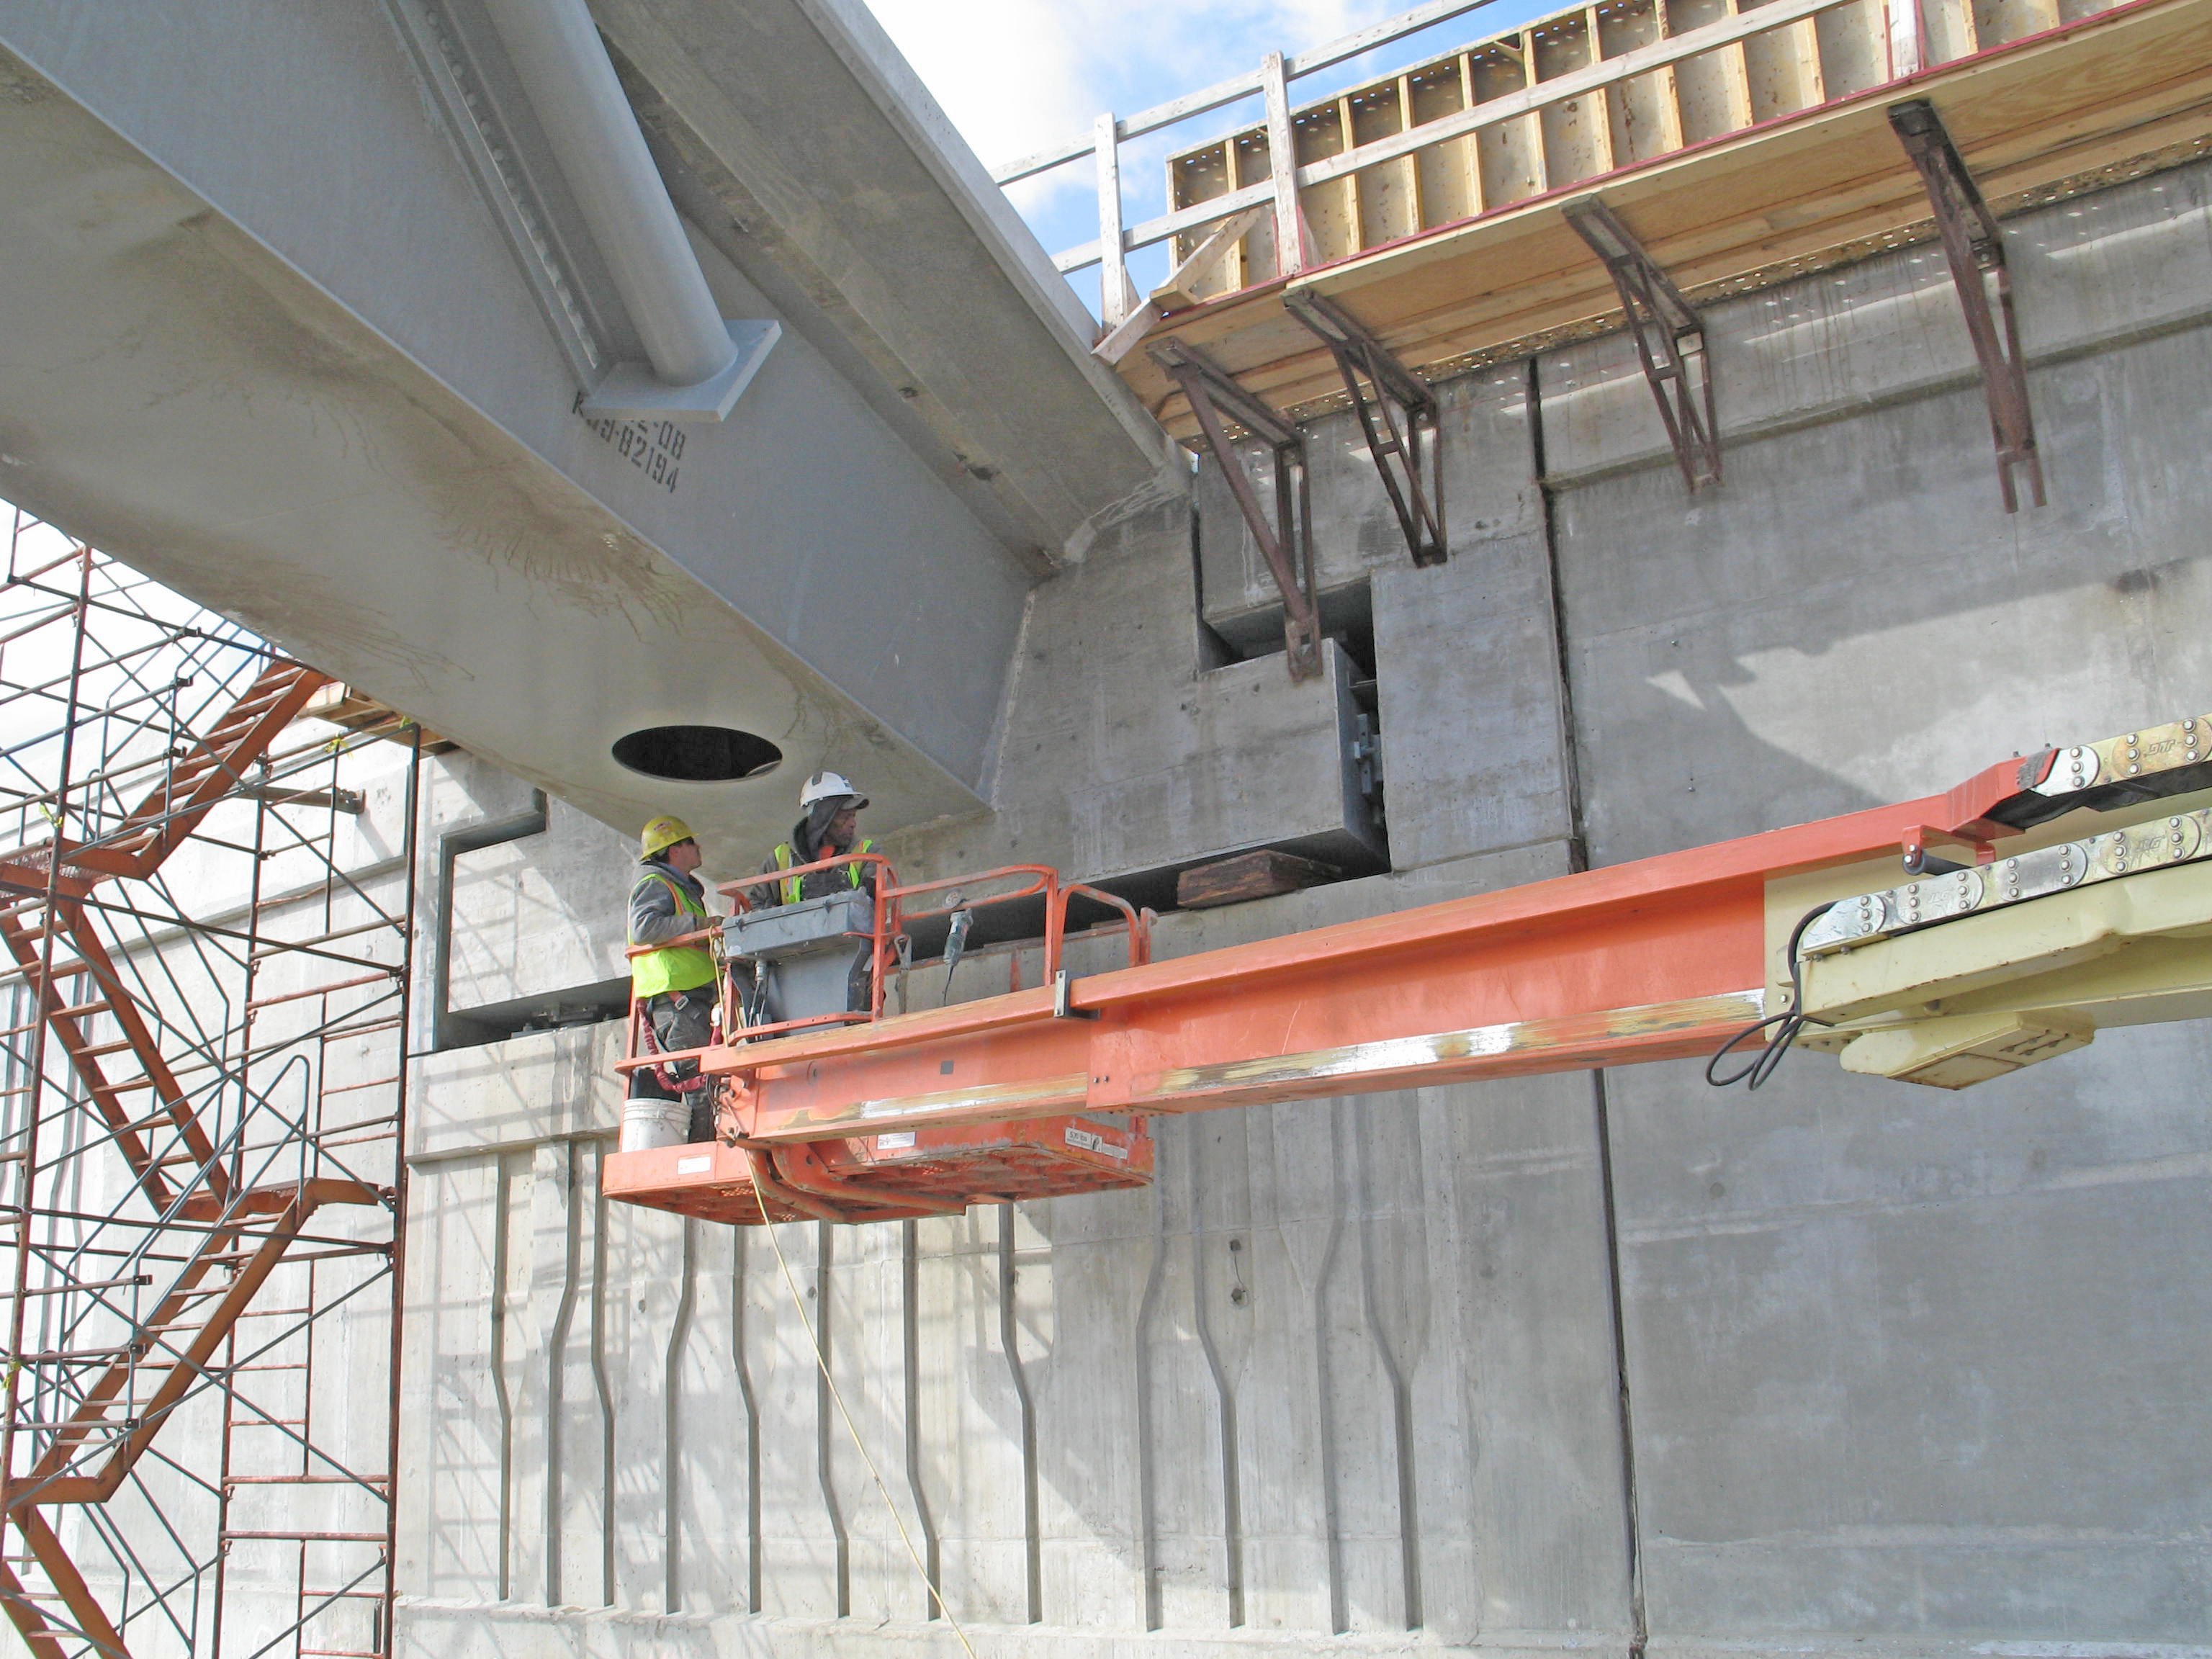 Two Cement Masons work on a bridge, part of the I75 Gateway Project.